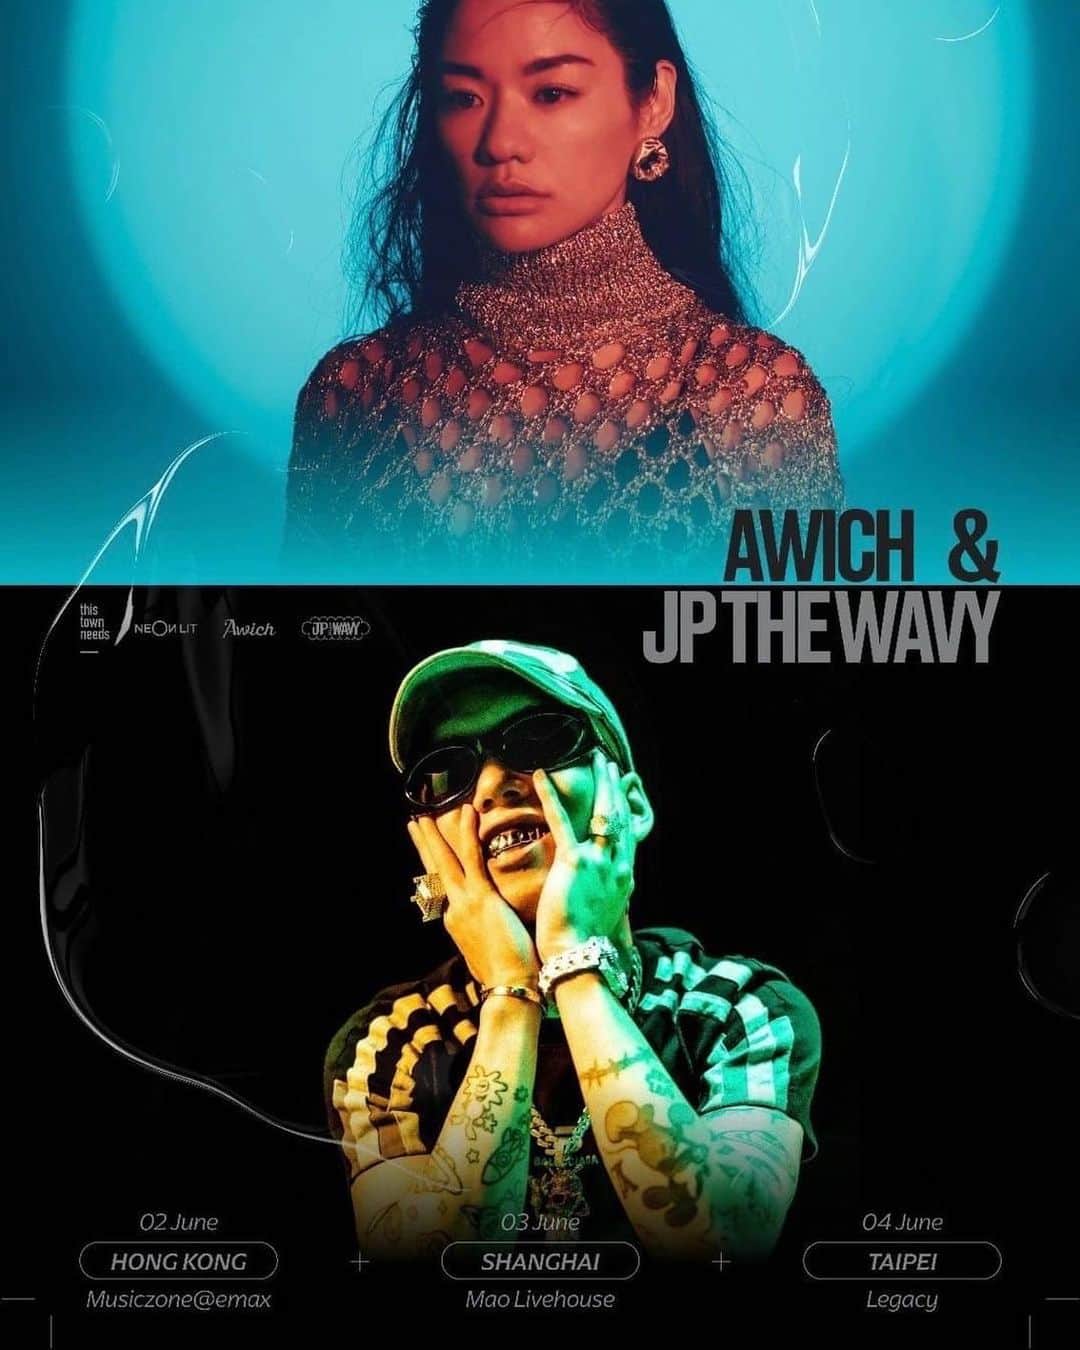 JP THE WAVYのインスタグラム：「Awich & JP THE WAVY "Rising Asia Tour"   2023/06/02 (FRI) 香港 MUSICZONE@EMAX Special guest : Youngqueenz https://neon-lit.com/event/awich-jpthewavy-hk  2023/06/03 (SAT) 上海 MAOLIVEHOUSE Special guests：Psy.P | Straight Fire Gang https://mp.weixin.qq.com/s/_zf3xj5WJBaFDwSWjfxk6w  2023/06/04 (SUN) 台北 LEGACY TAIPEI Special guests：Asiaboy & Lizi | Multiverse https://icon-promotions-tw.kktix.cc/events/klerh  #Awich #JPTHEWAVY #RisingAsiaTour」